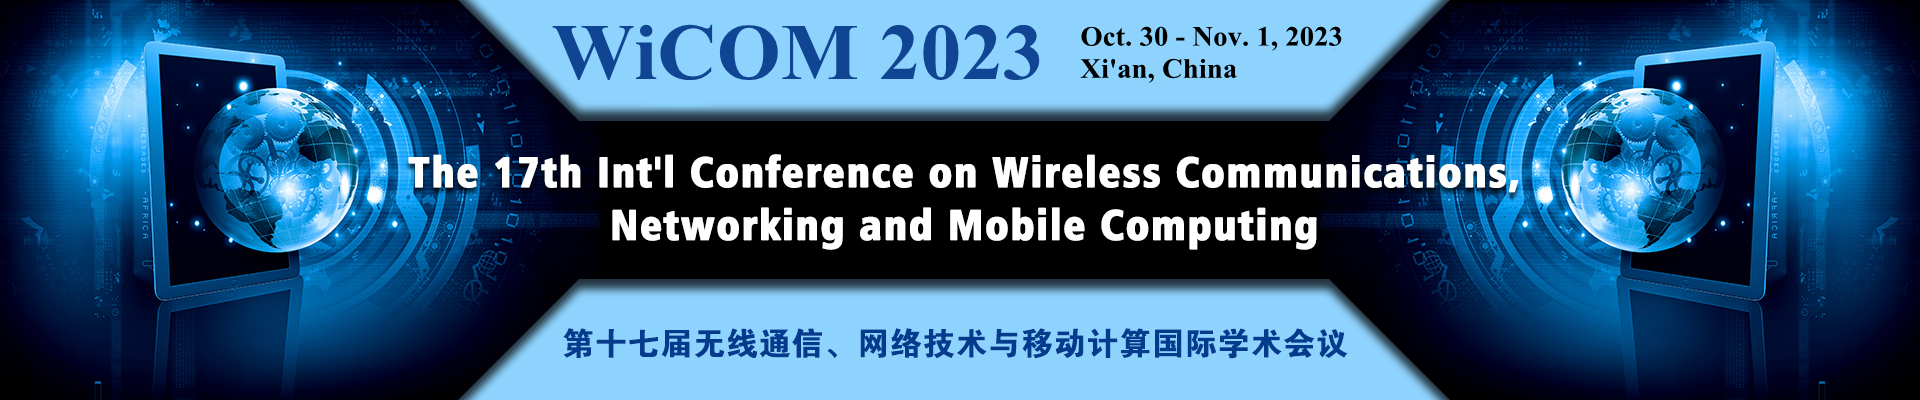 The 17th Int'l Conference on Wireless Communications, Networking and Mobile Computing (WiCOM 2023)